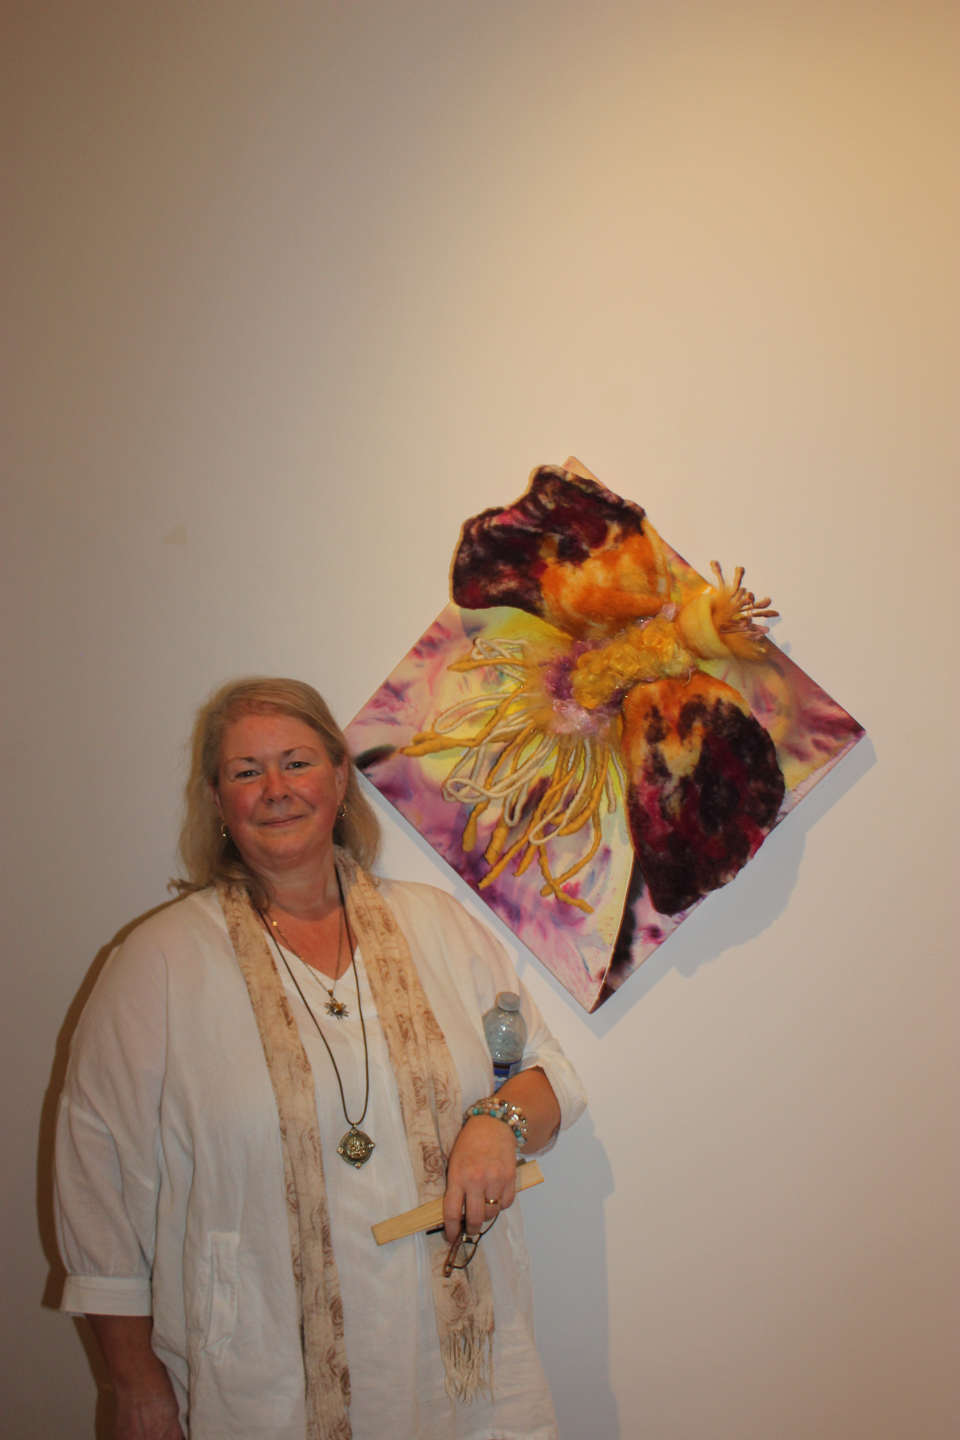 Sheila Farstad stands next to Big Purple/Yellow Hairy Flower, which was one of her submissions for t